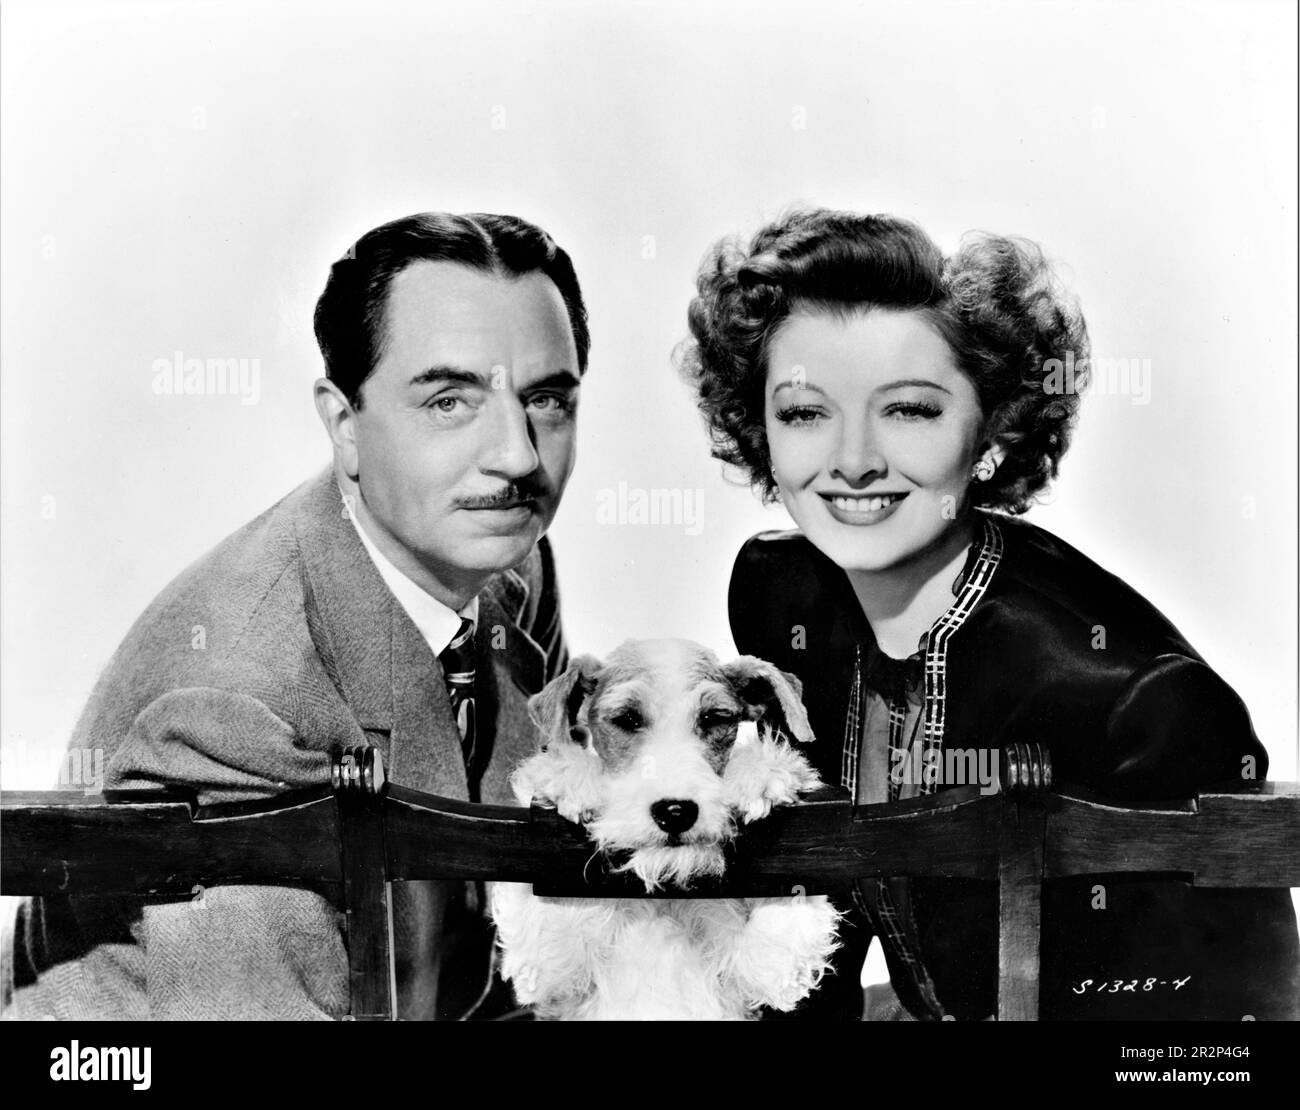 WILLIAM POWELL as Nick Charles MYRNA LOY as Nora Charles and ASTA the Dog Portrait in THE THIN MAN GOES HOME 1944 director RICHARD THORPE based on characters created by Dashiell Hammett original story Robert Riskin and Harry Kurnitz screenplay Robert Riskin and Dwight Taylor Metro Goldwyn Mayer (MGM) Stock Photo